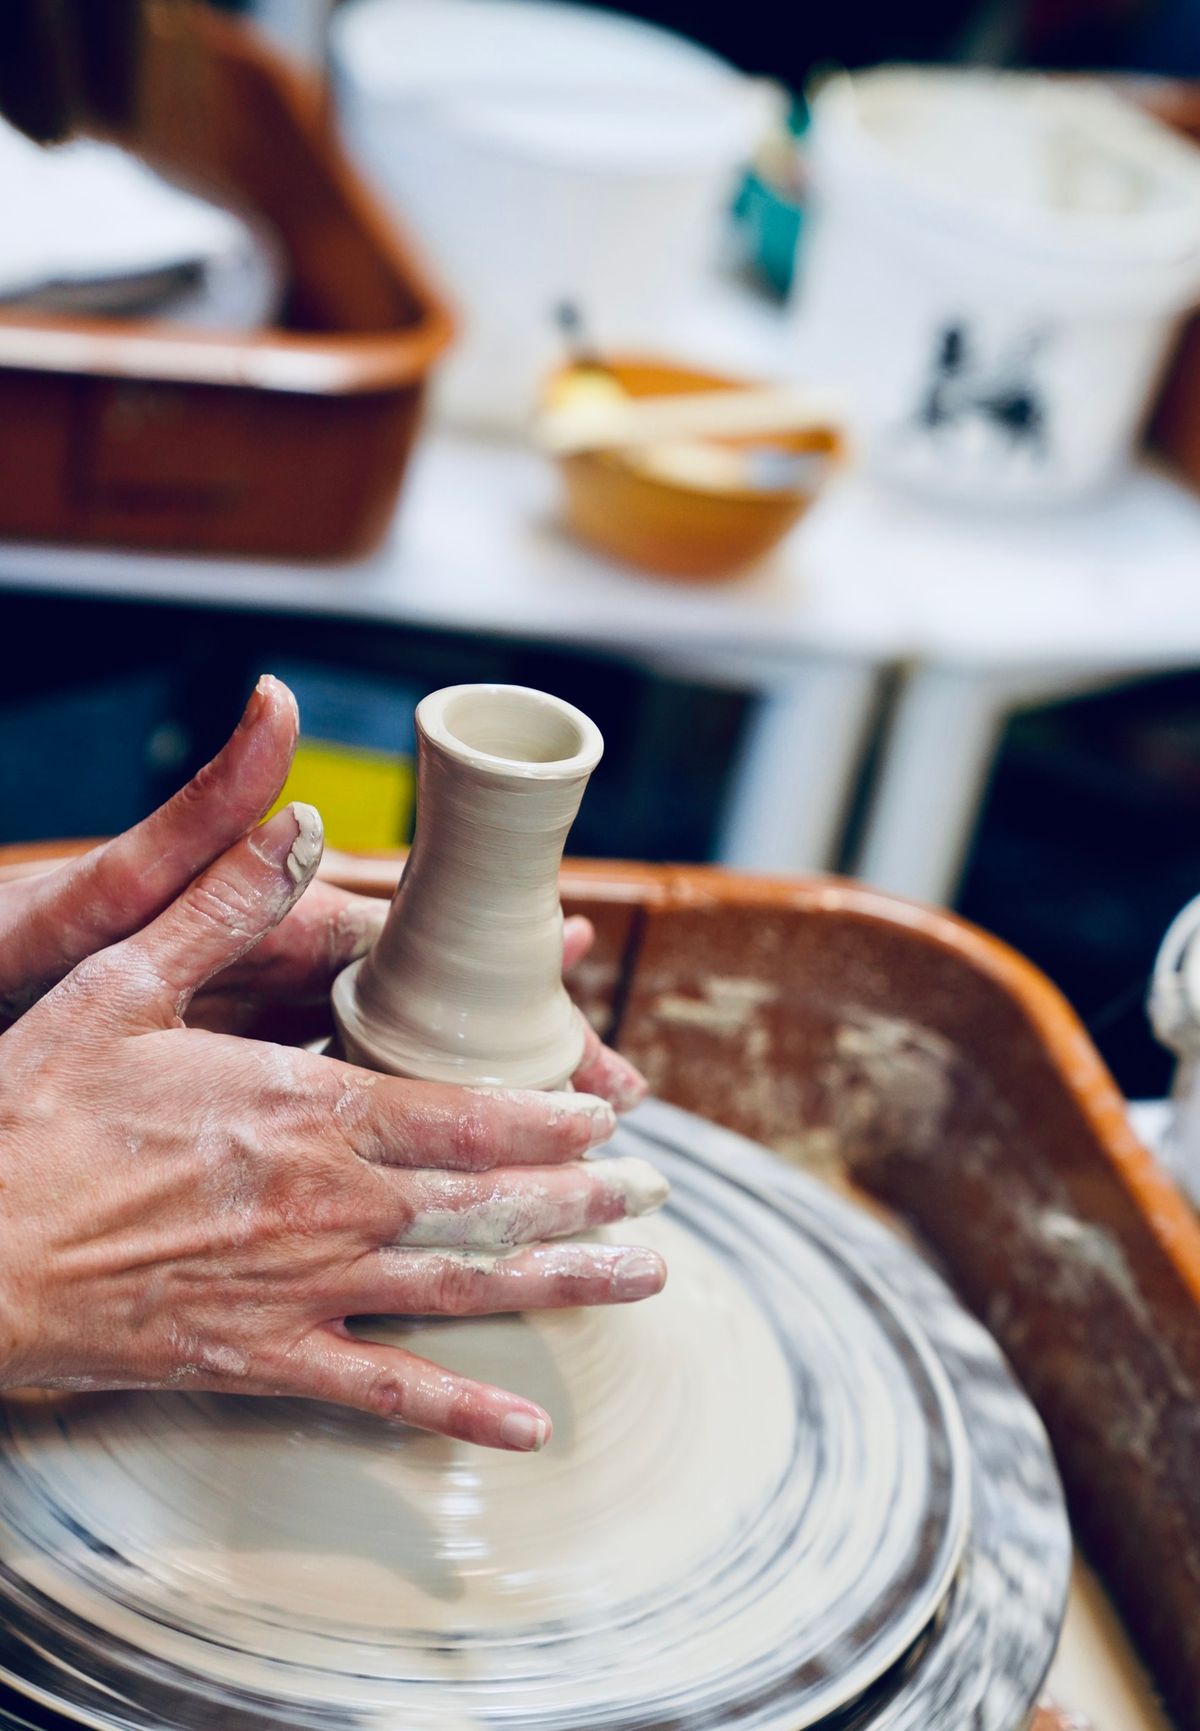 One day "Try-It" Pottery Class.      It is a fun class for beginners to learn pottery-making basics.